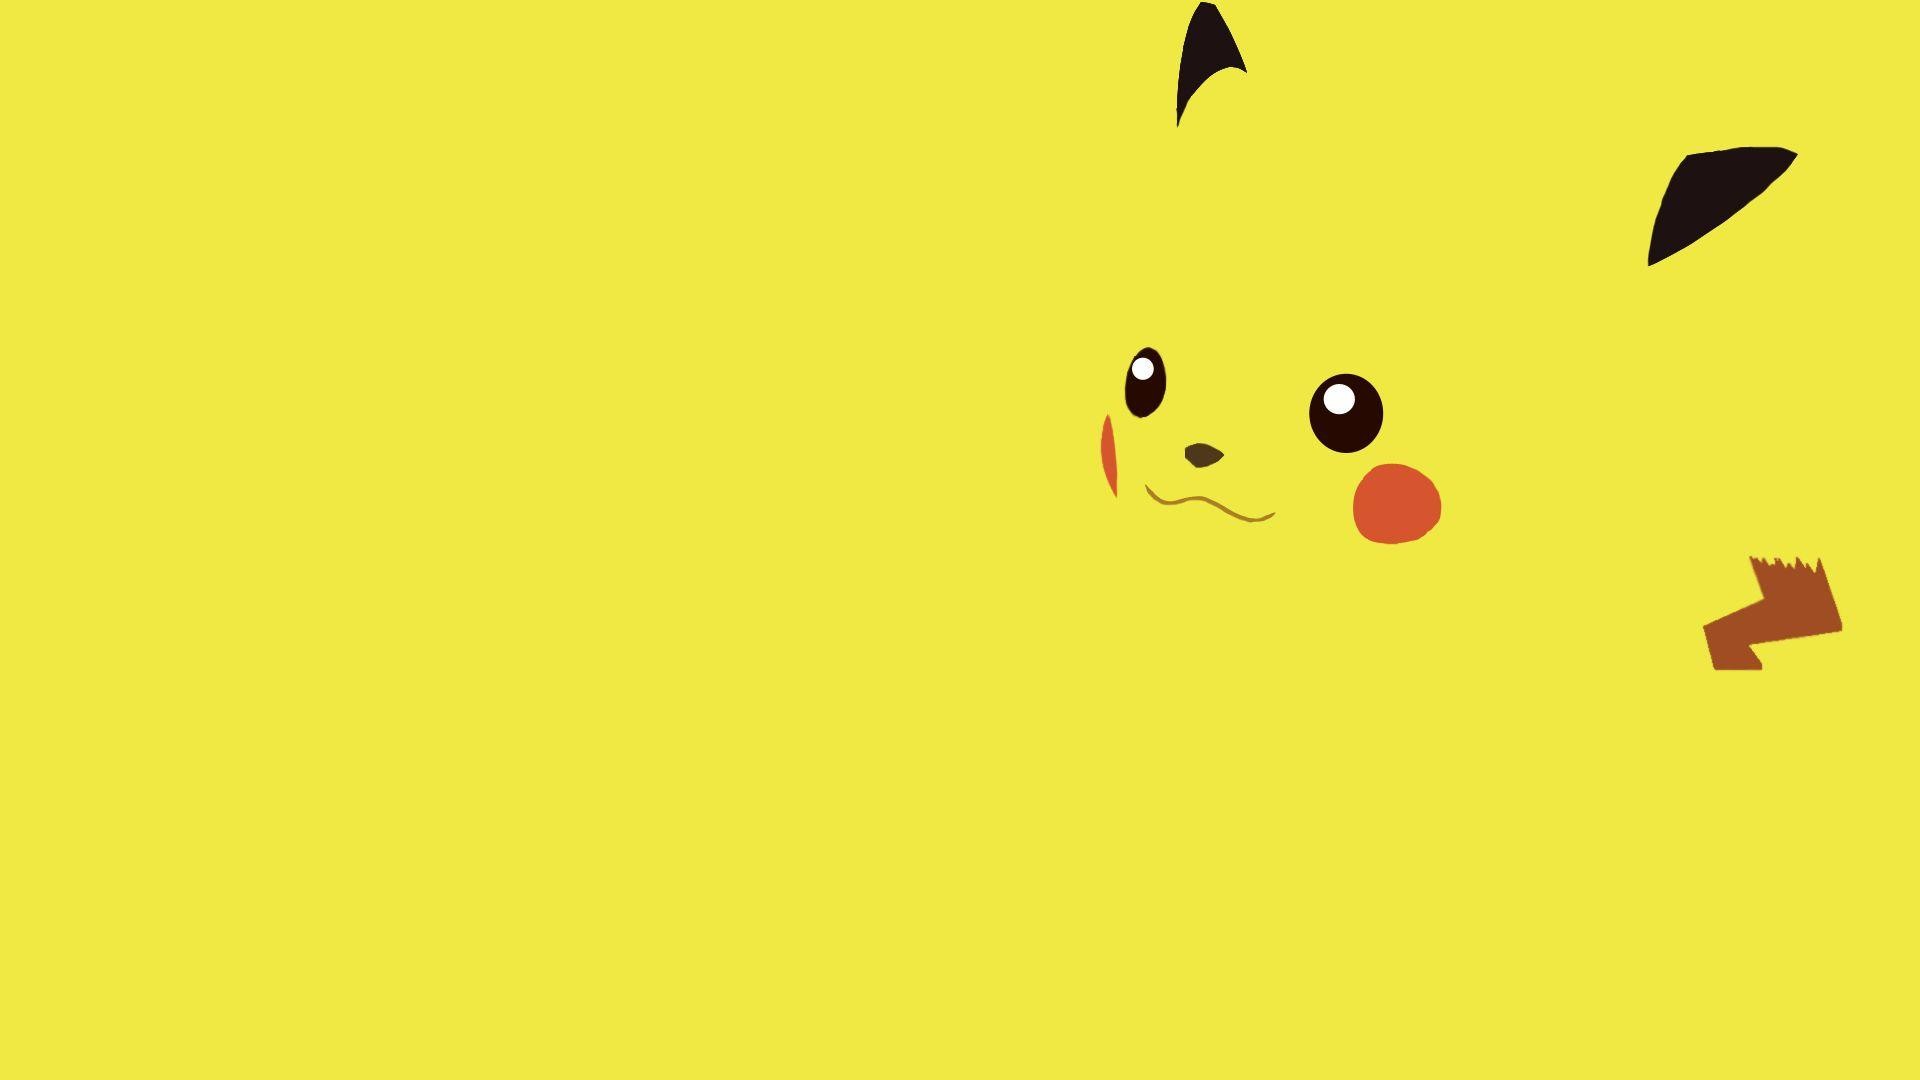 Wallpapers For Cute Pikachu Wallpaper For Ipad